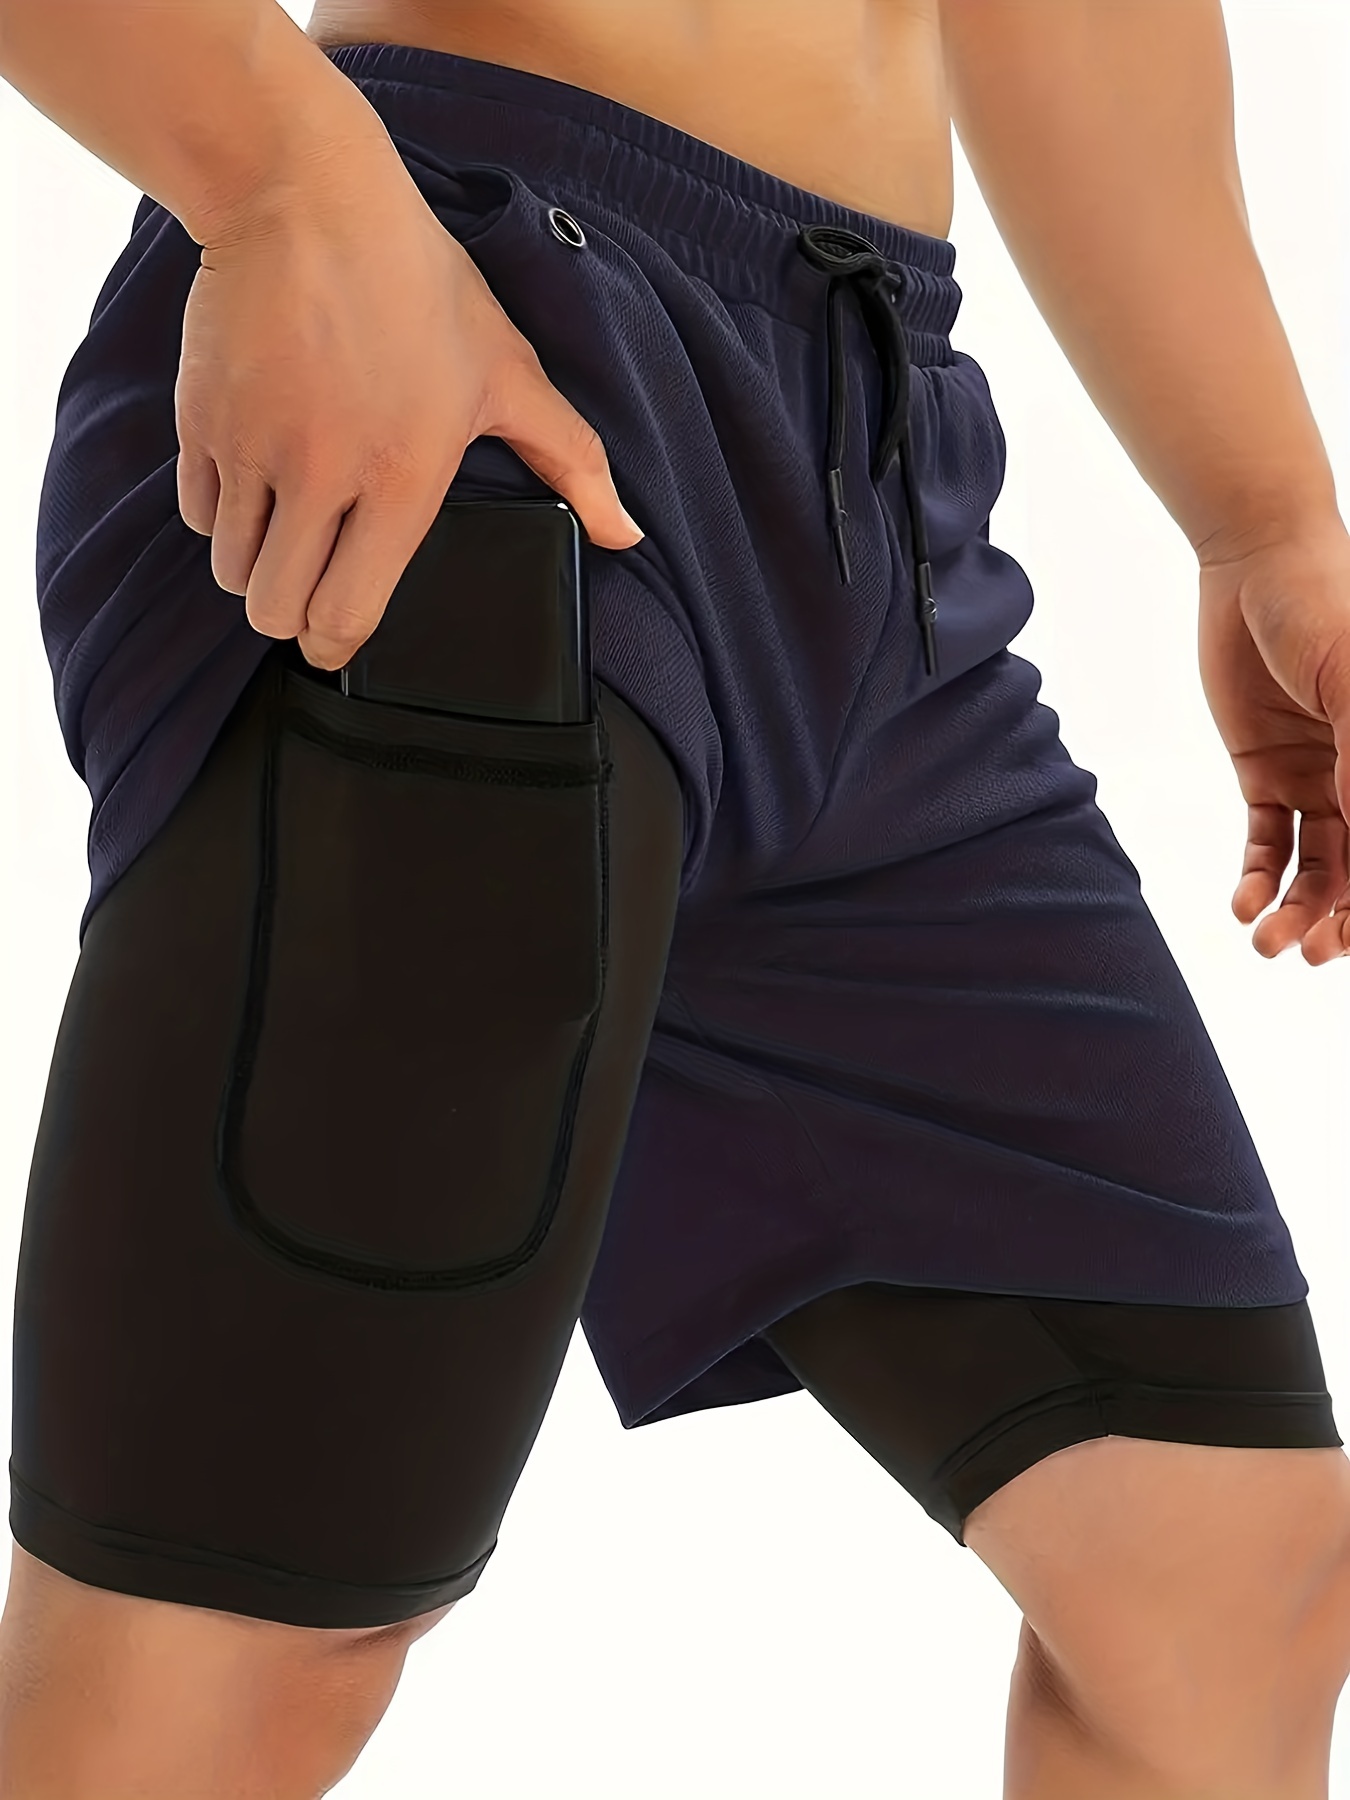 Women's Running Athletic Shorts with Zipper Pockets for Workout